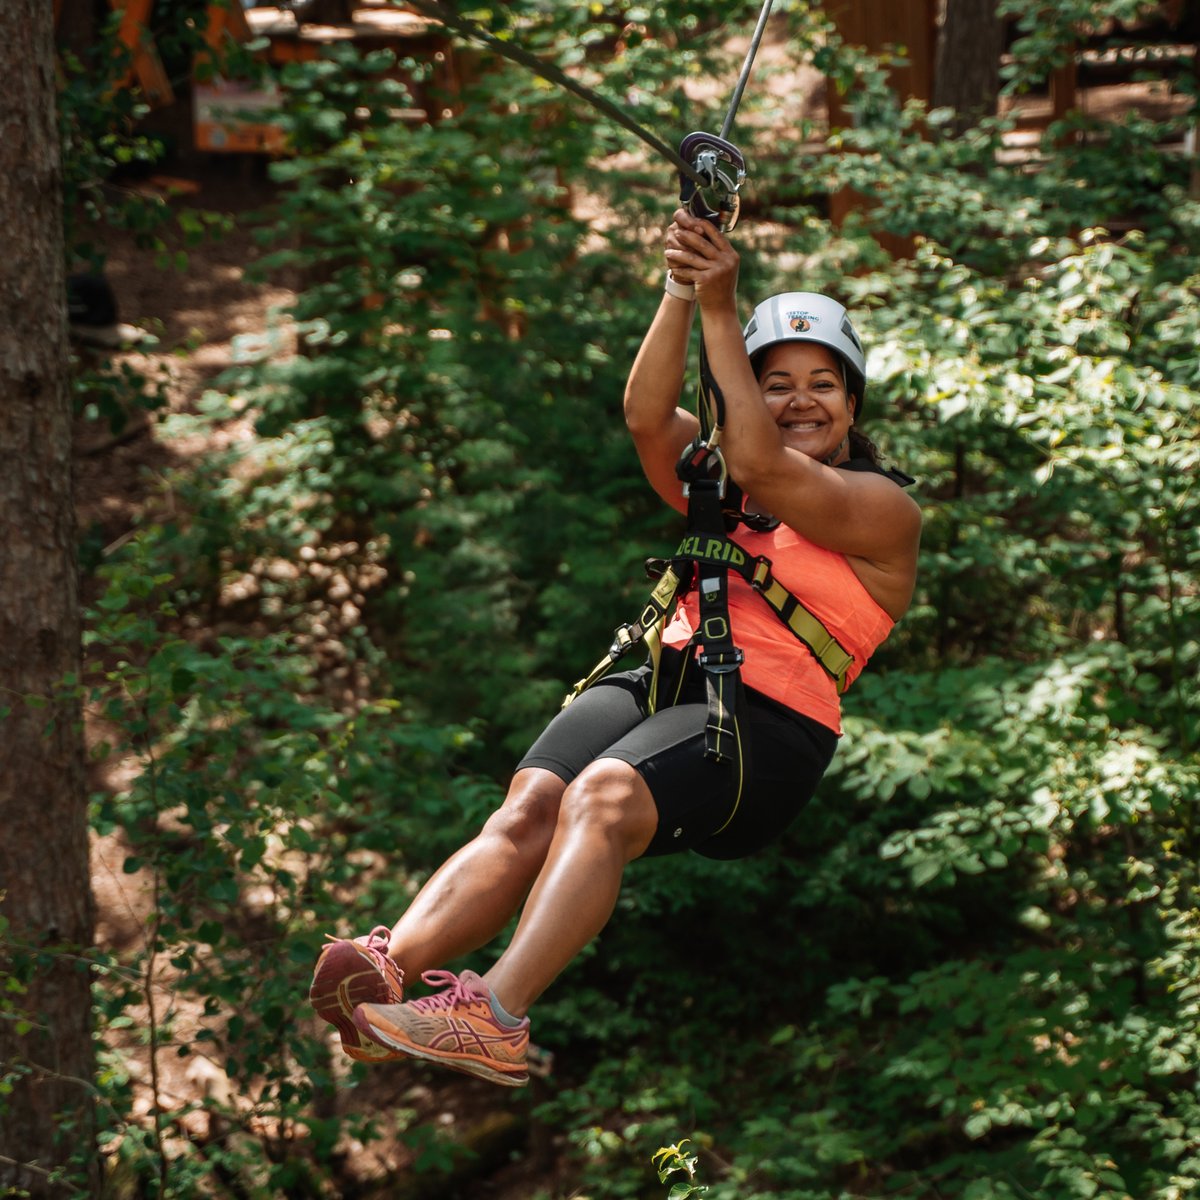 Located in the heart of the beautiful Ganaraska Forest in #PortHopeON, @TreetopTrekking offers an exhilarating treetop adventure course, zipline canopy tours, night treks and a forest treasure hunt (no heights required). More info here - treetoptrekking.com/park/ganaraska/